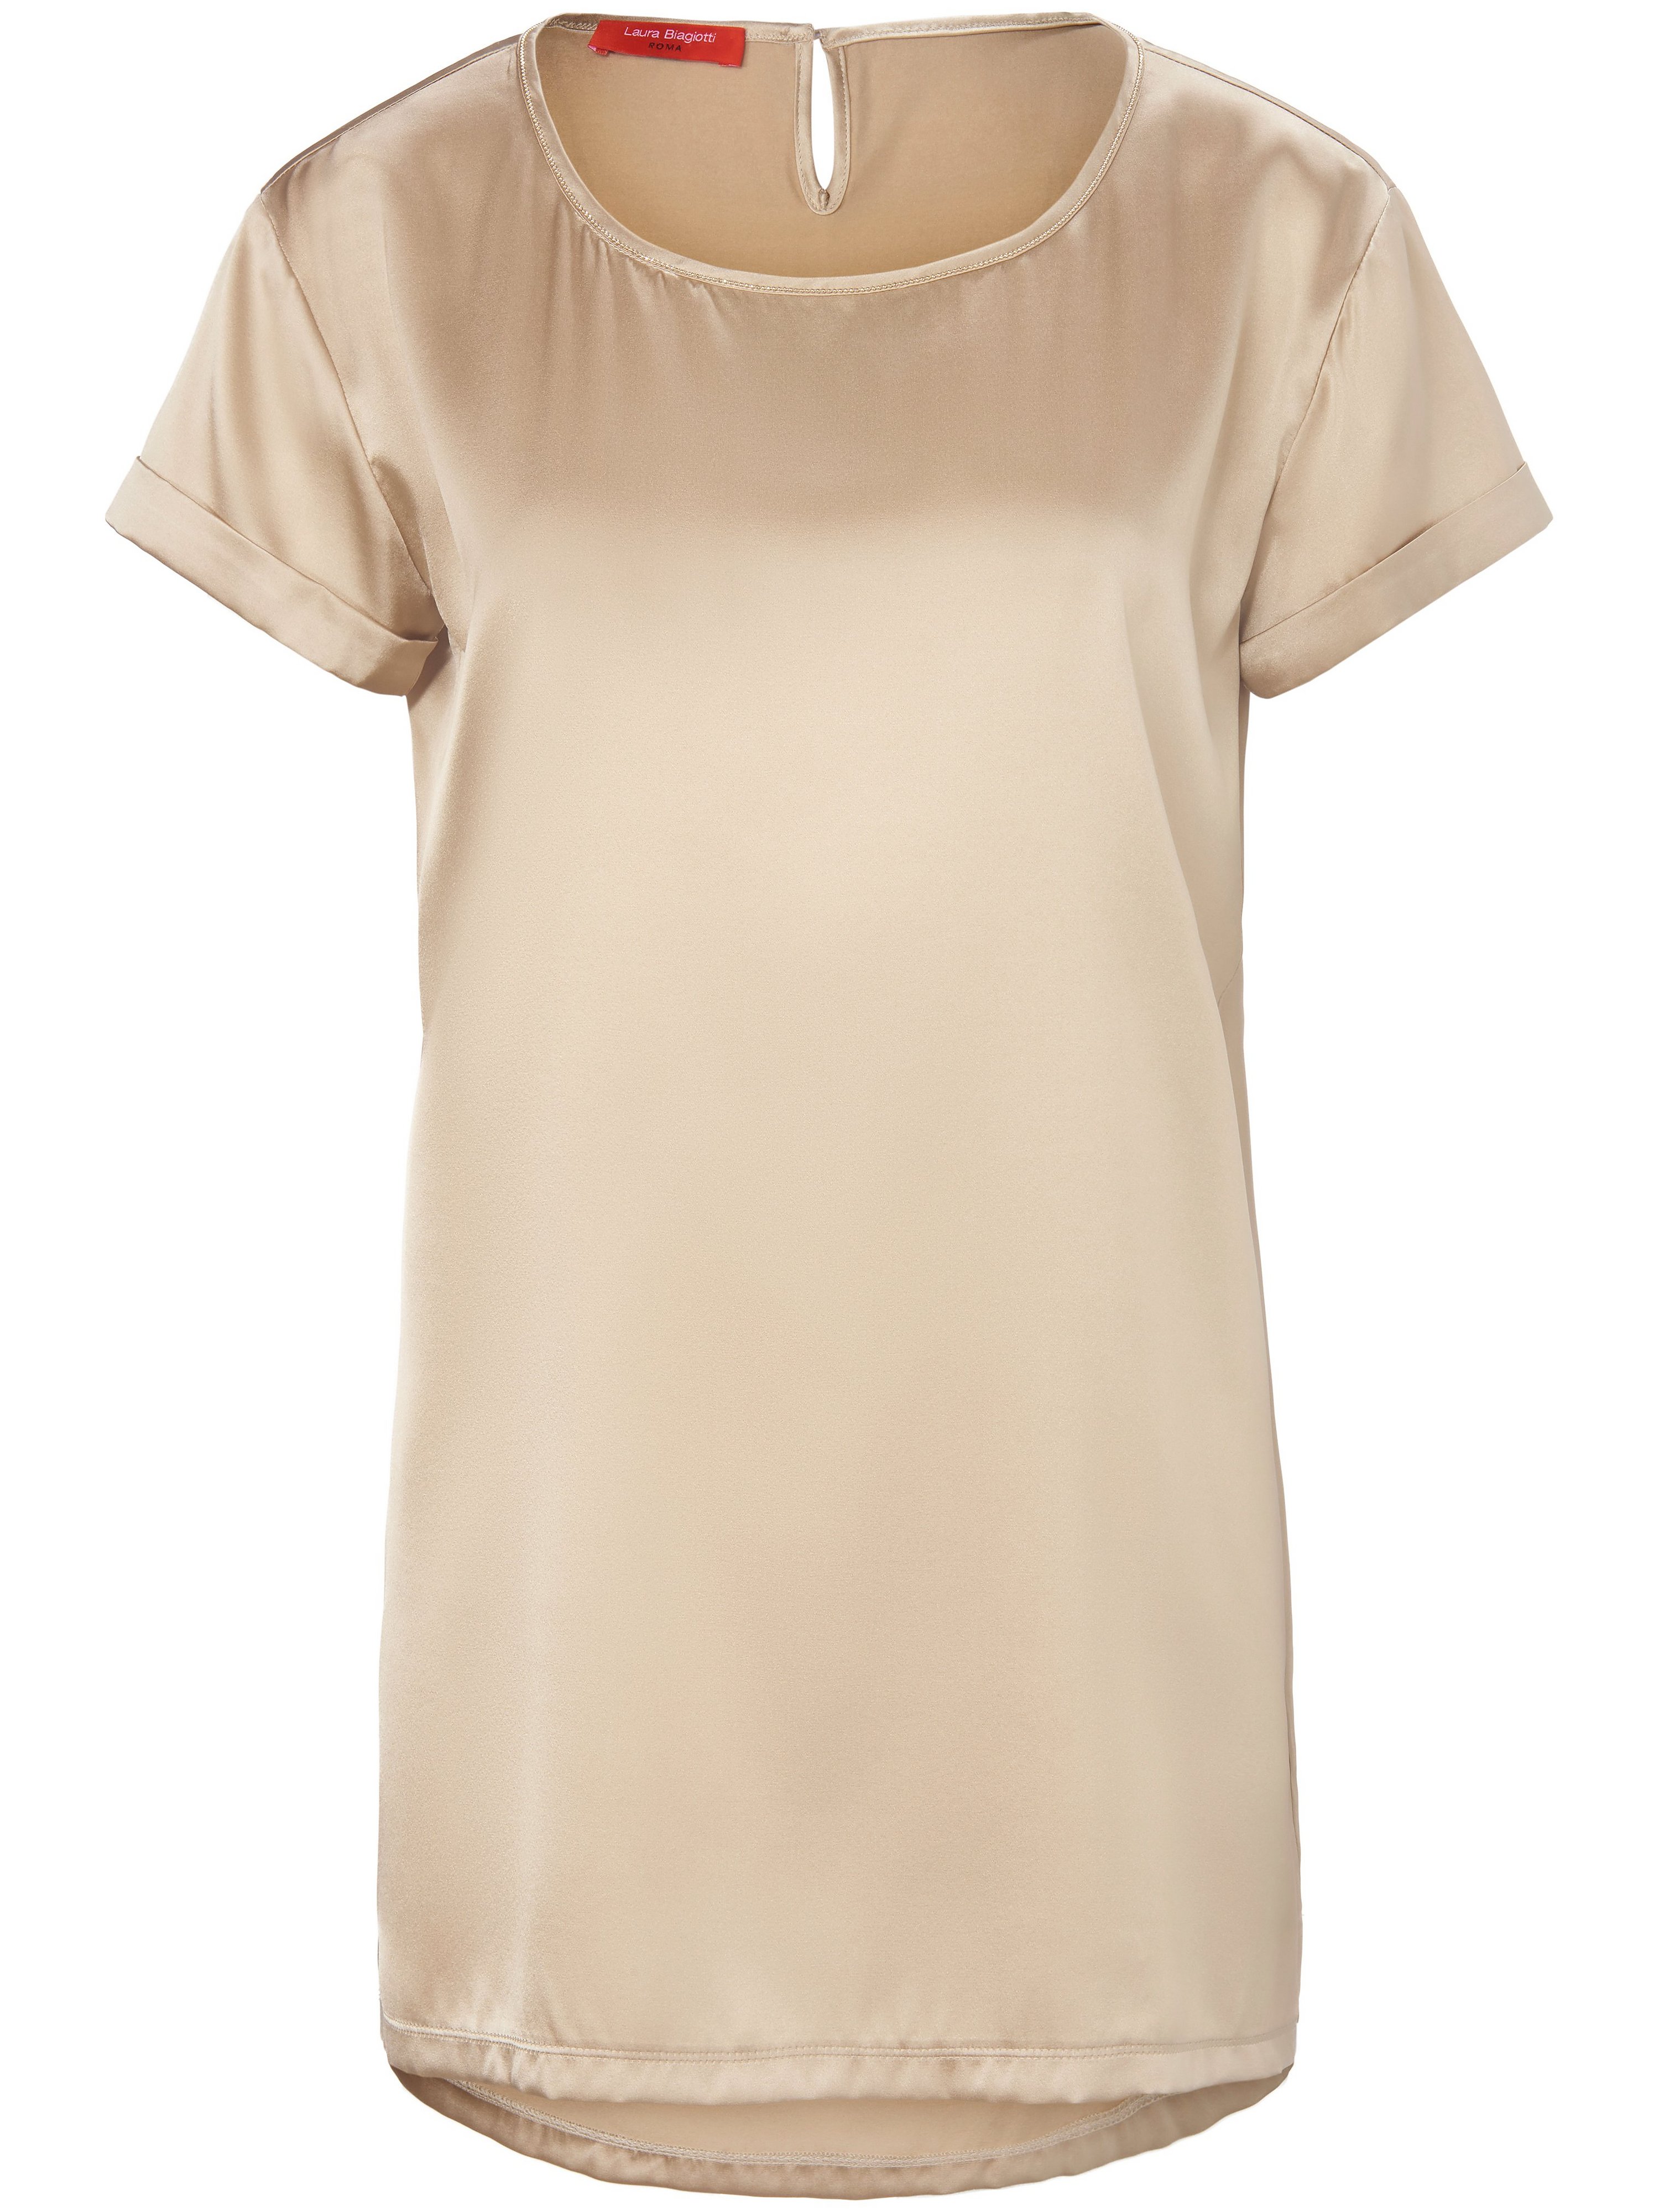 Le T-shirt satin soie  Laura Biagiotti ROMA beige taille 42